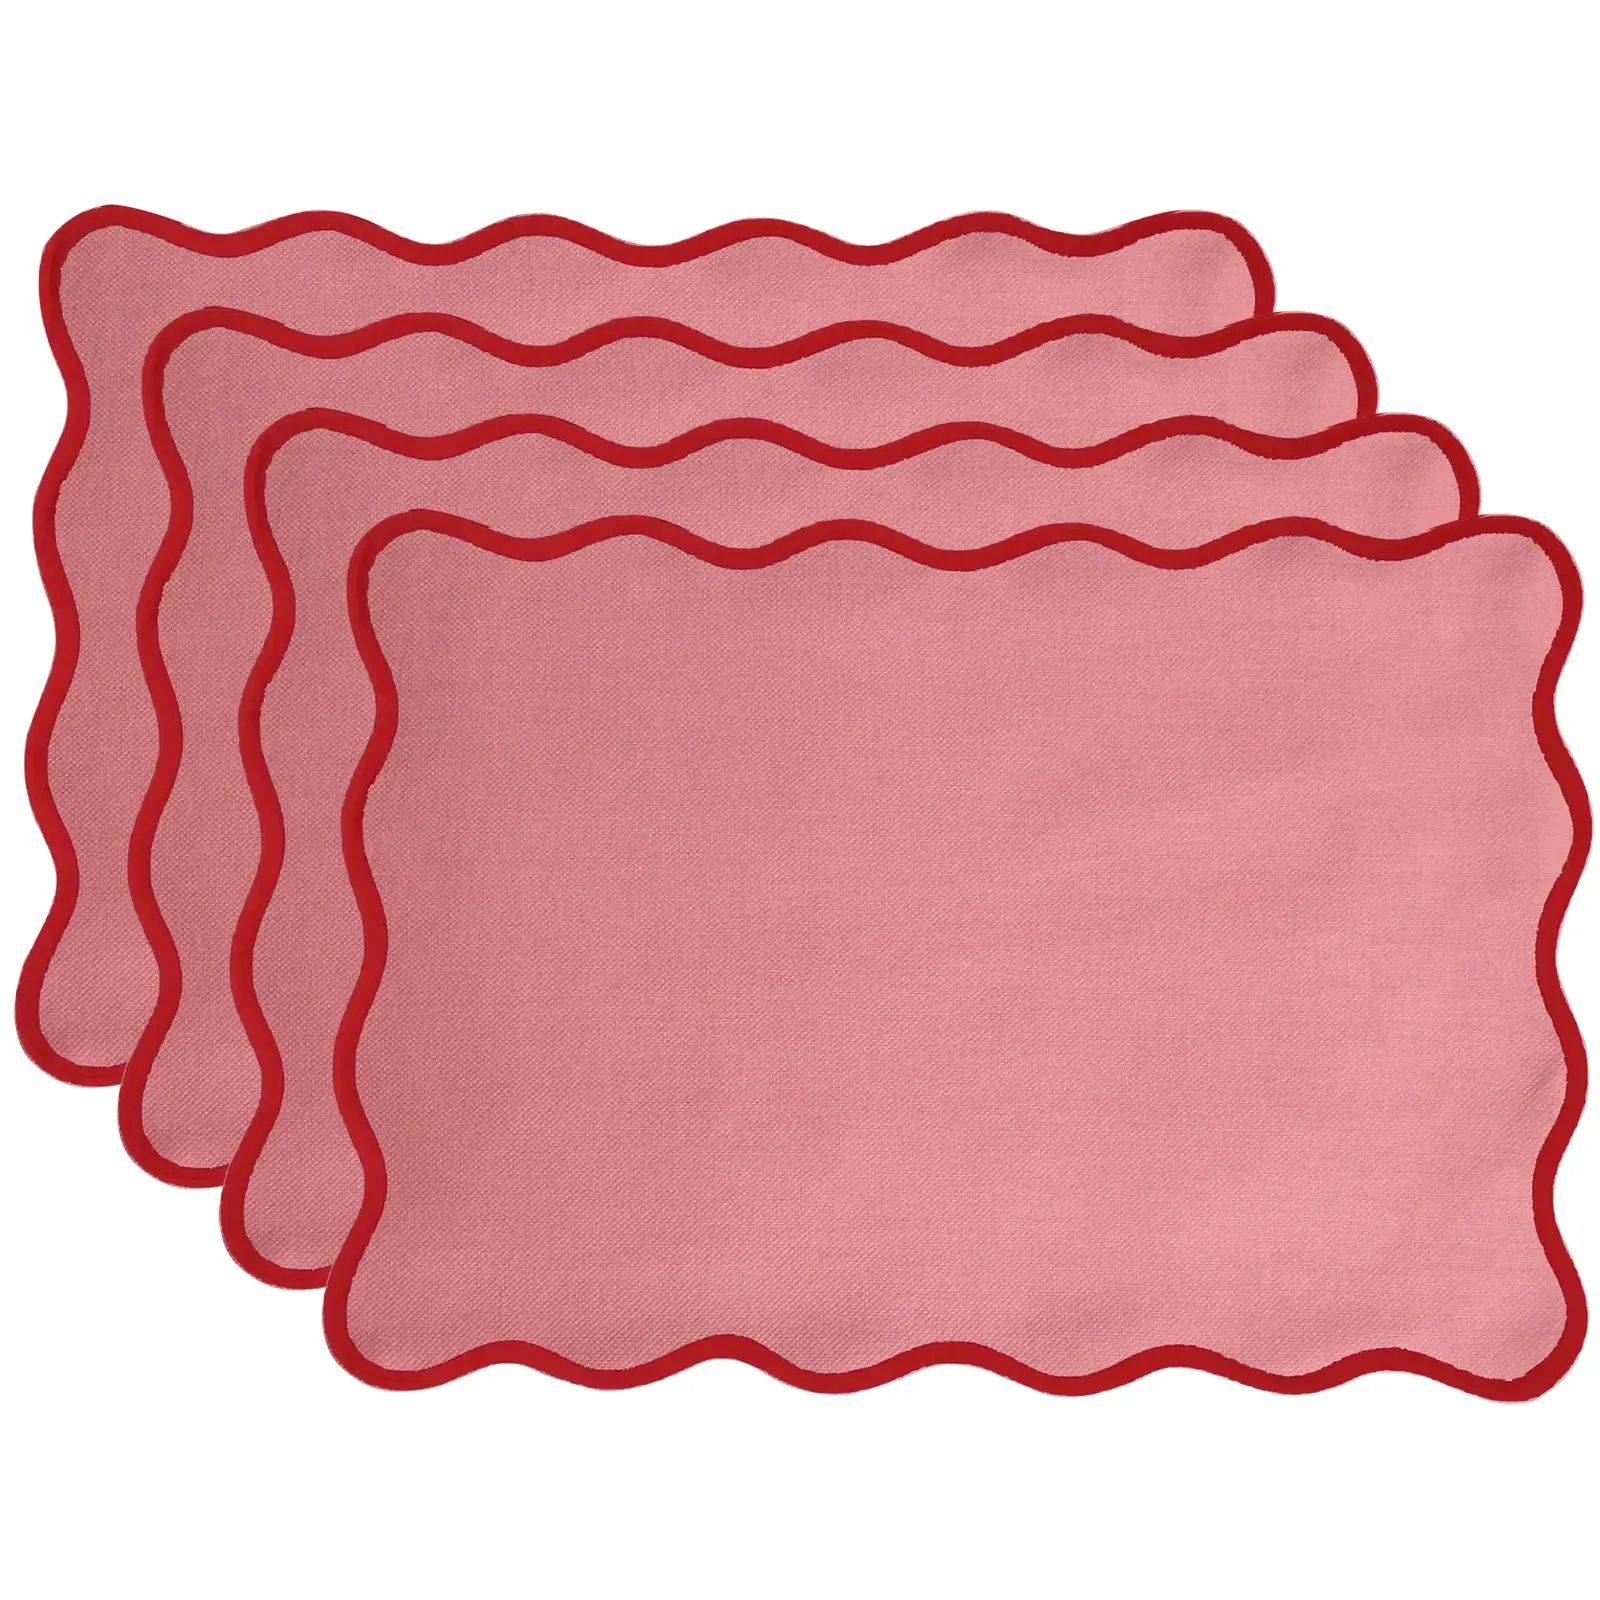 Pink with Red Trim Handmade Rectangular Scallop Placemats - Set of 4 | Chairish